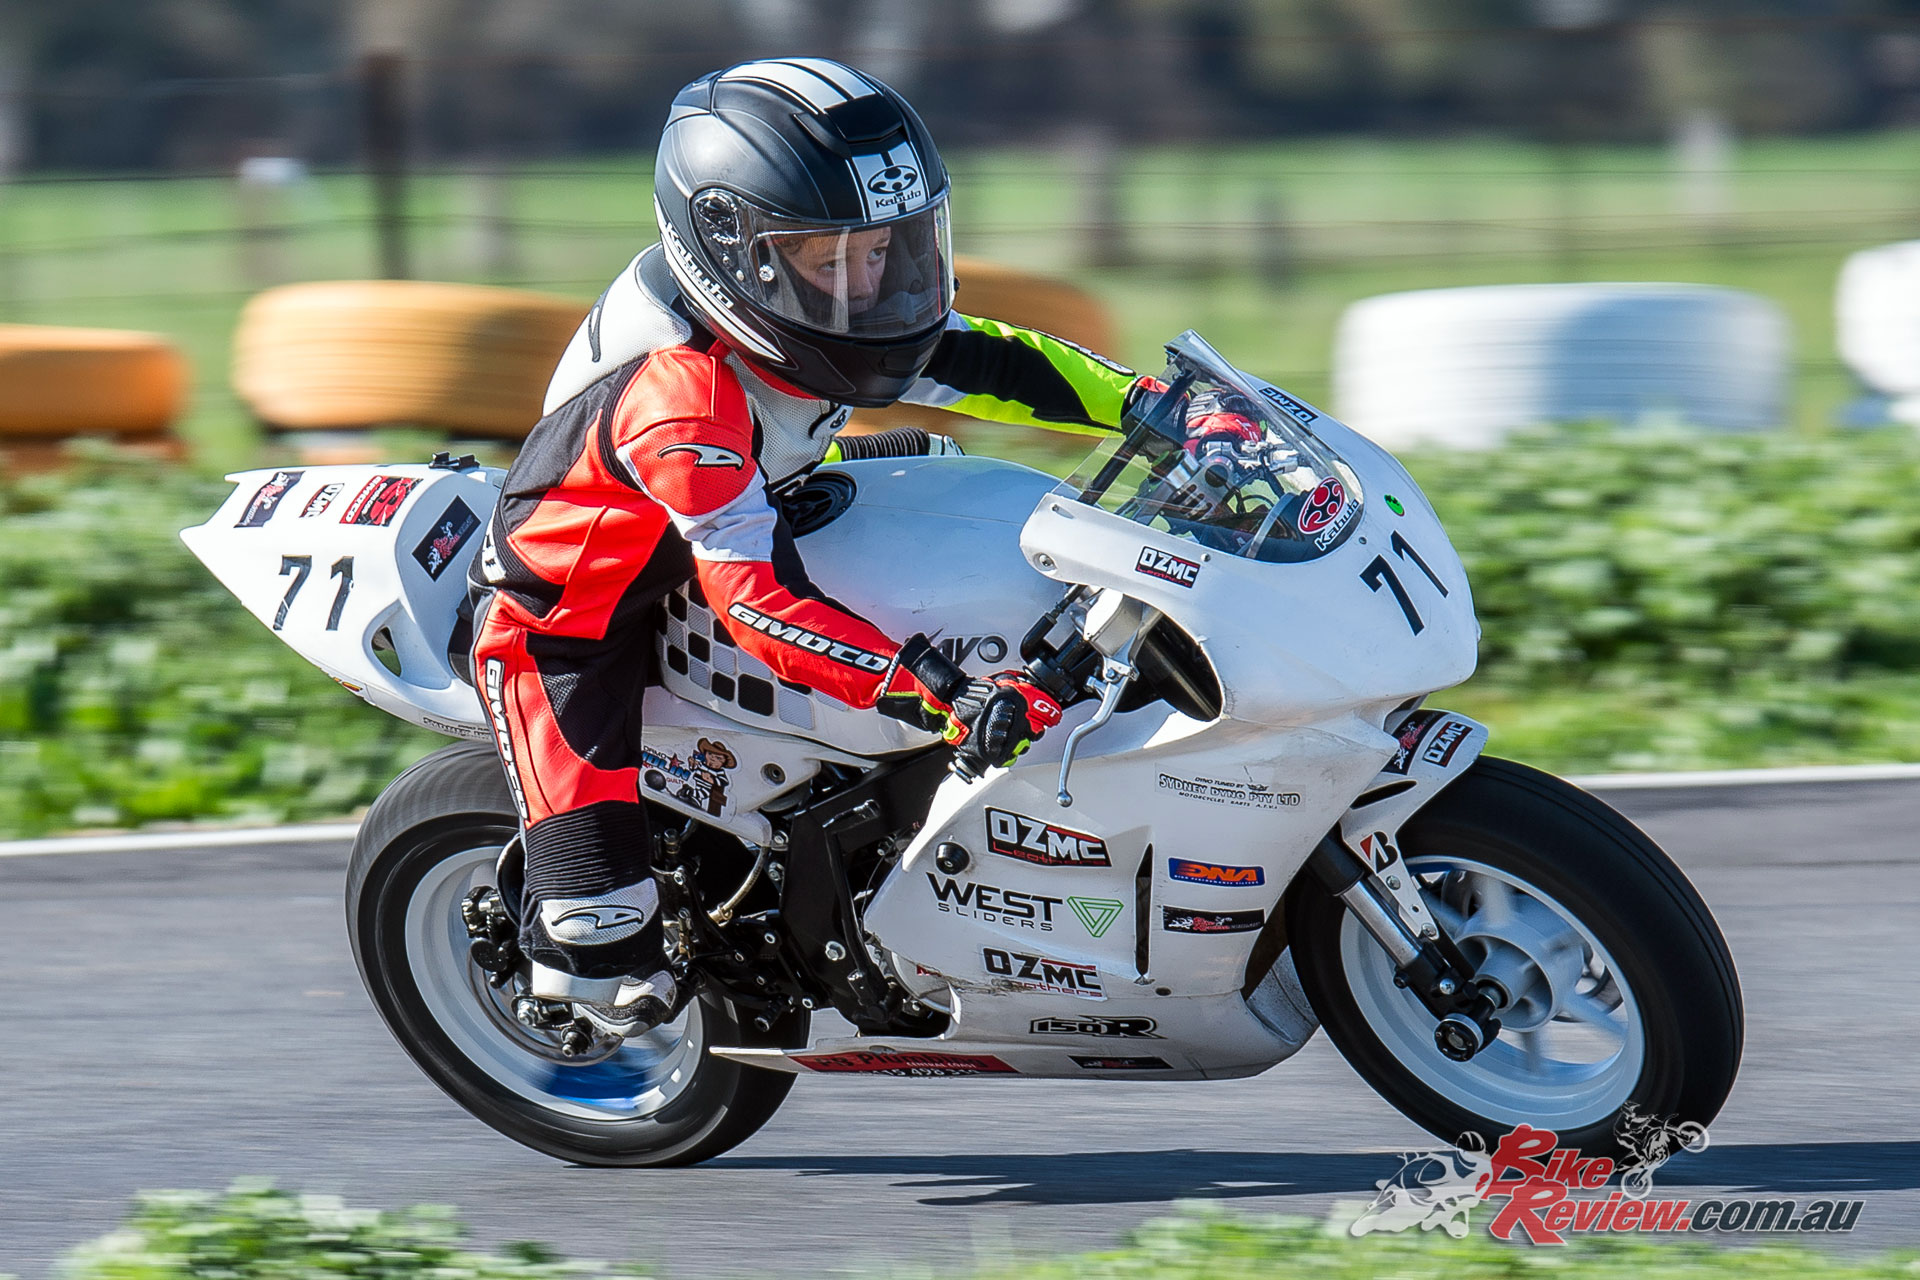 James Weaver riding at MotoStars Round 4 with the Kabuto RT-33 - Image by Col Roper